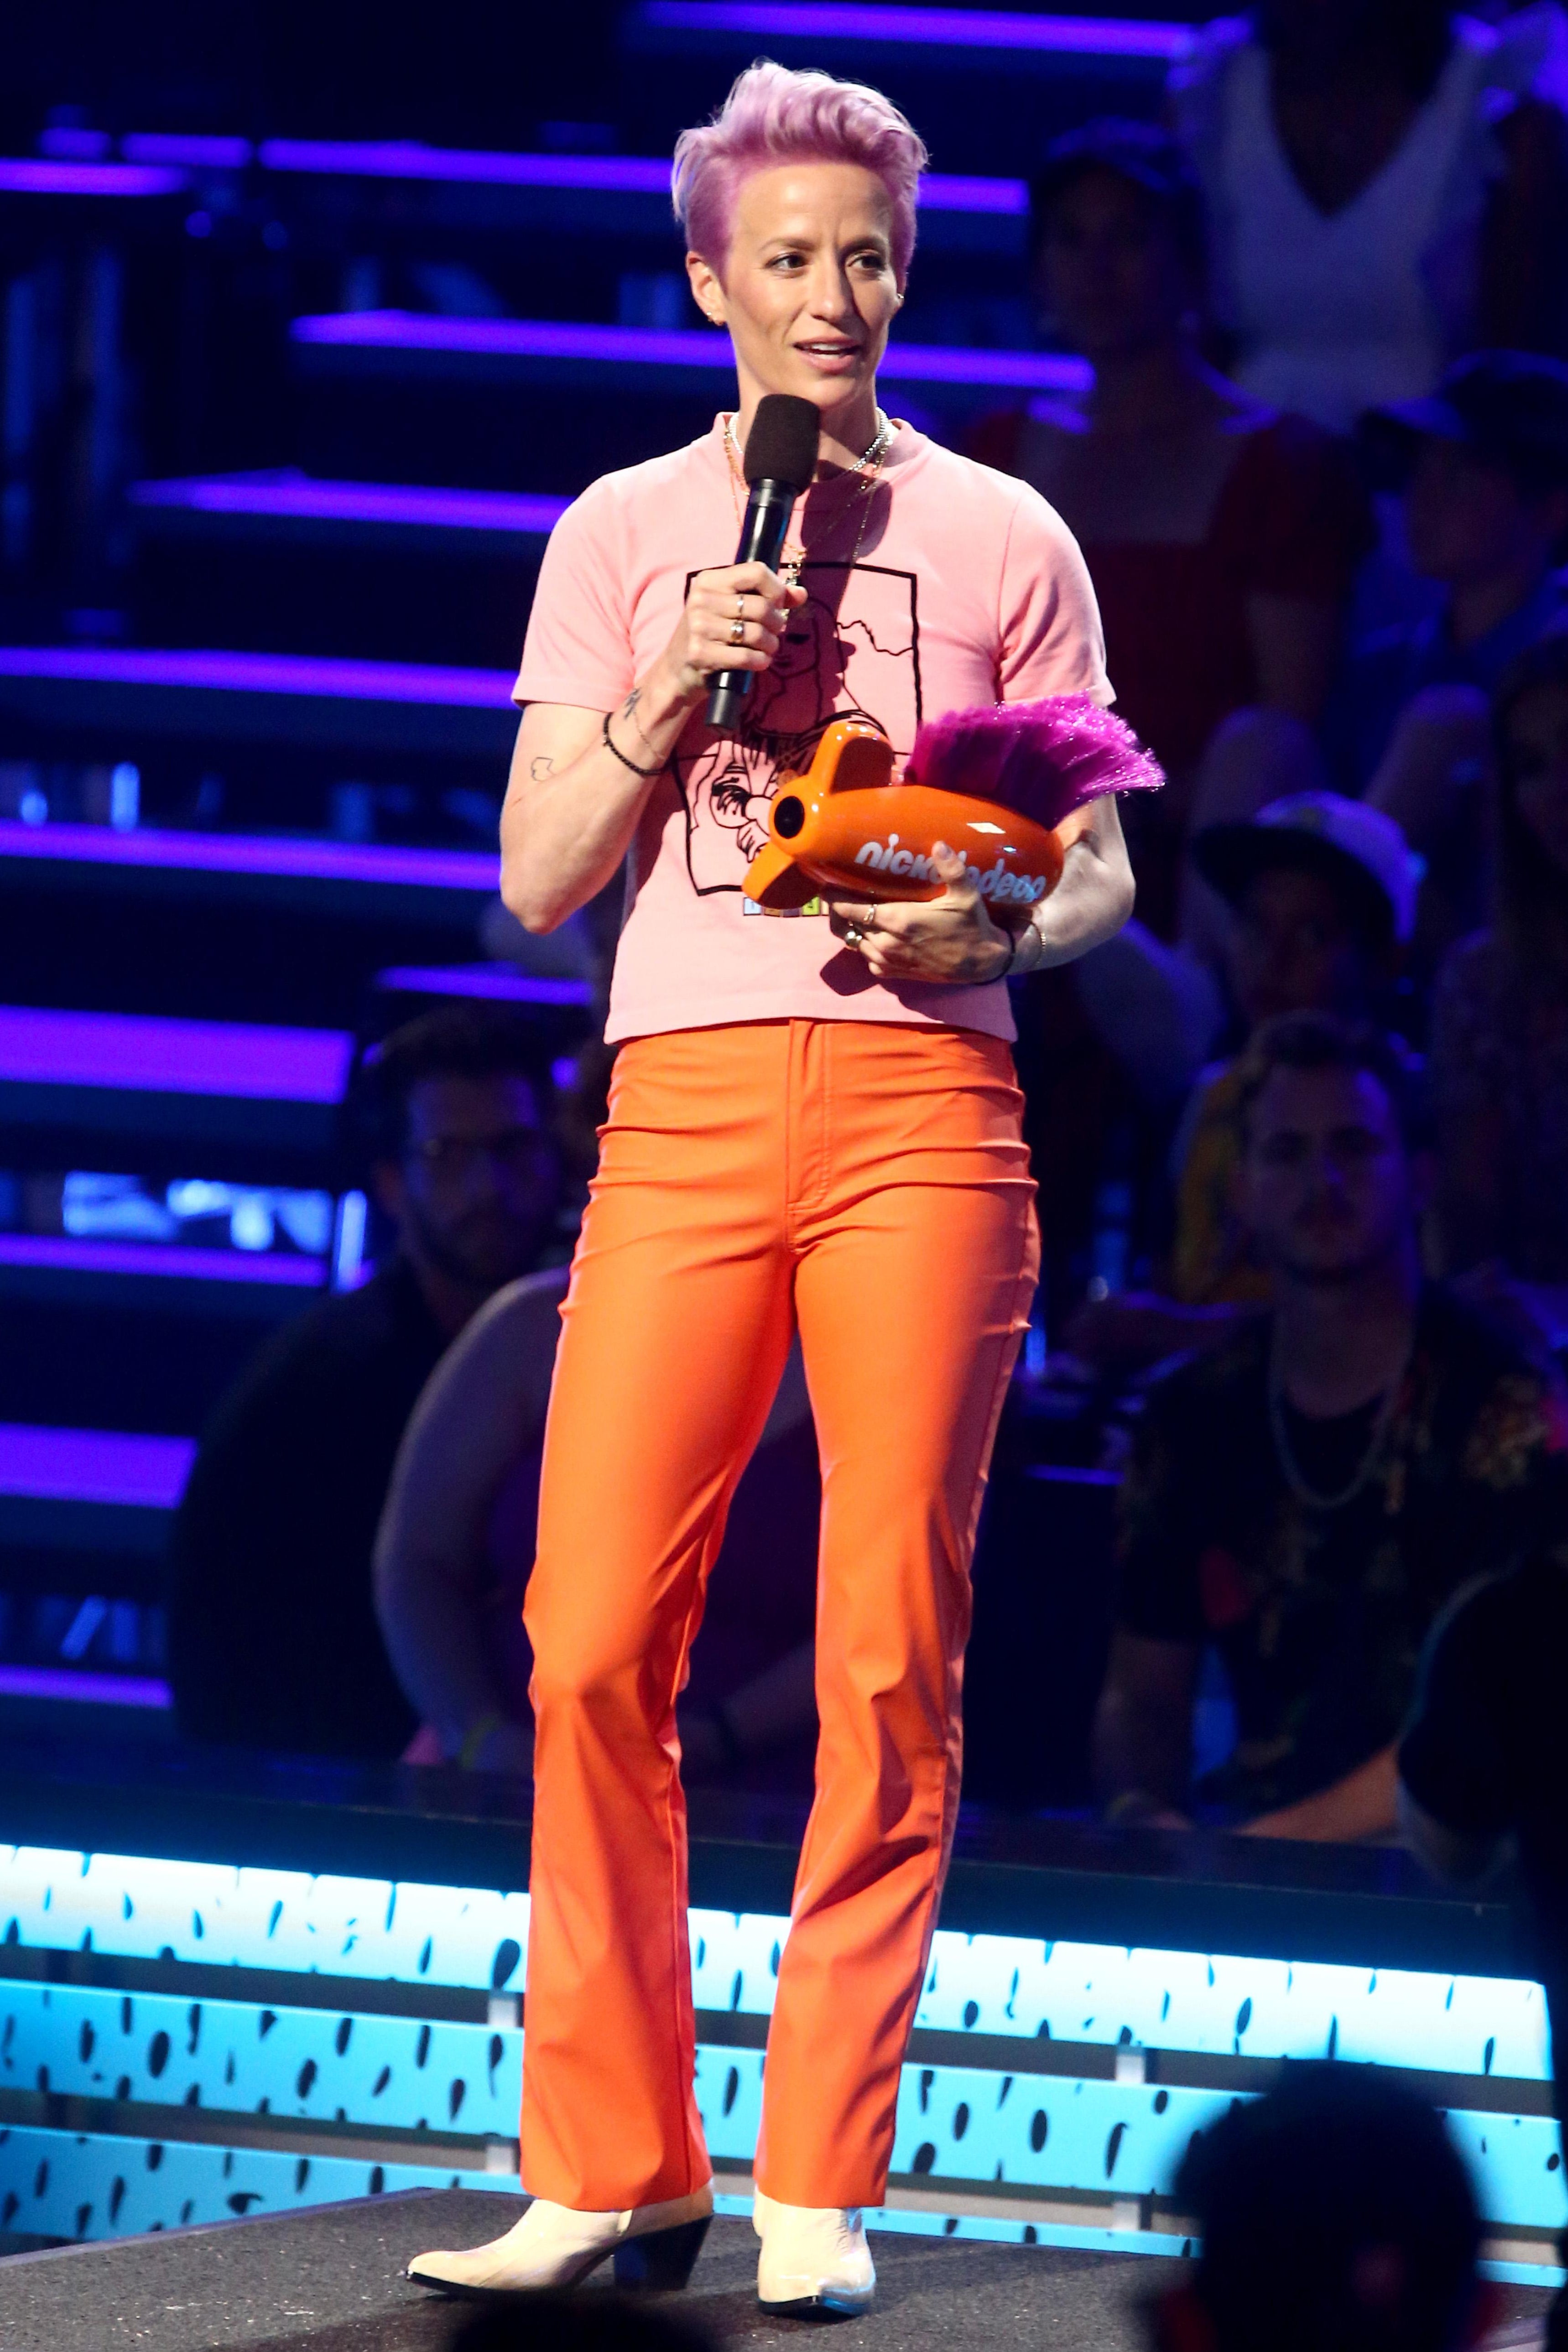 Megan Rapinoe holds an orange Nickelodeon trophy and speaks into a microphone onstage, wearing orange pants and white boots.